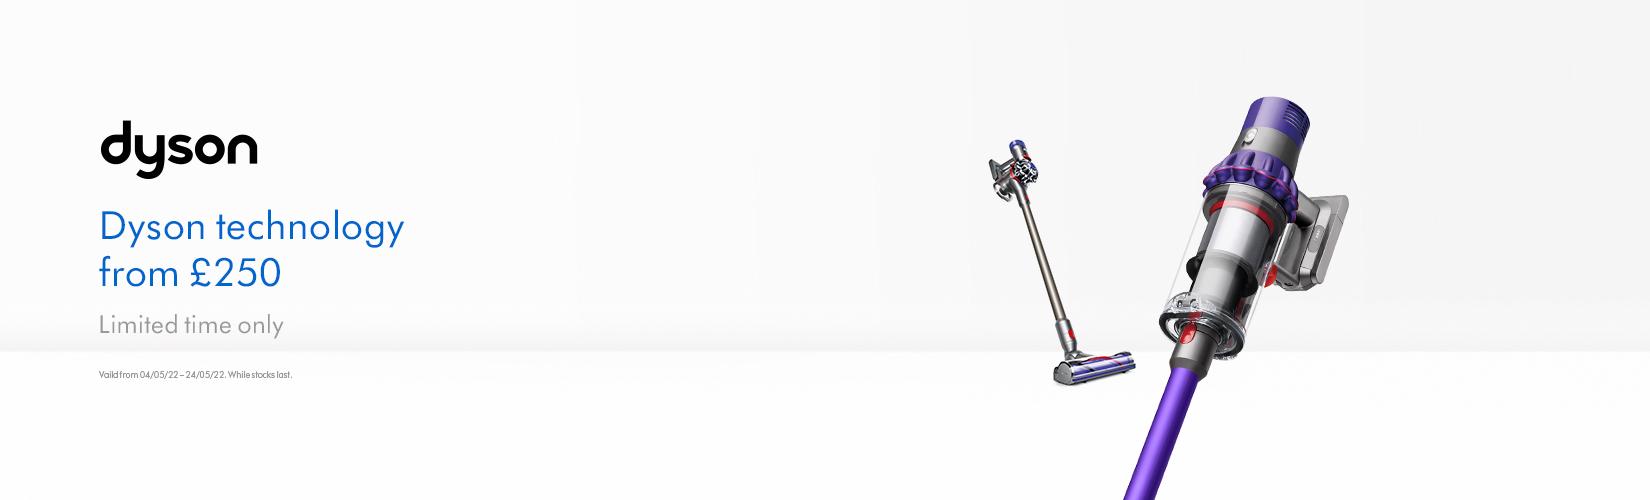 Dyson. Dyson technology from £250.